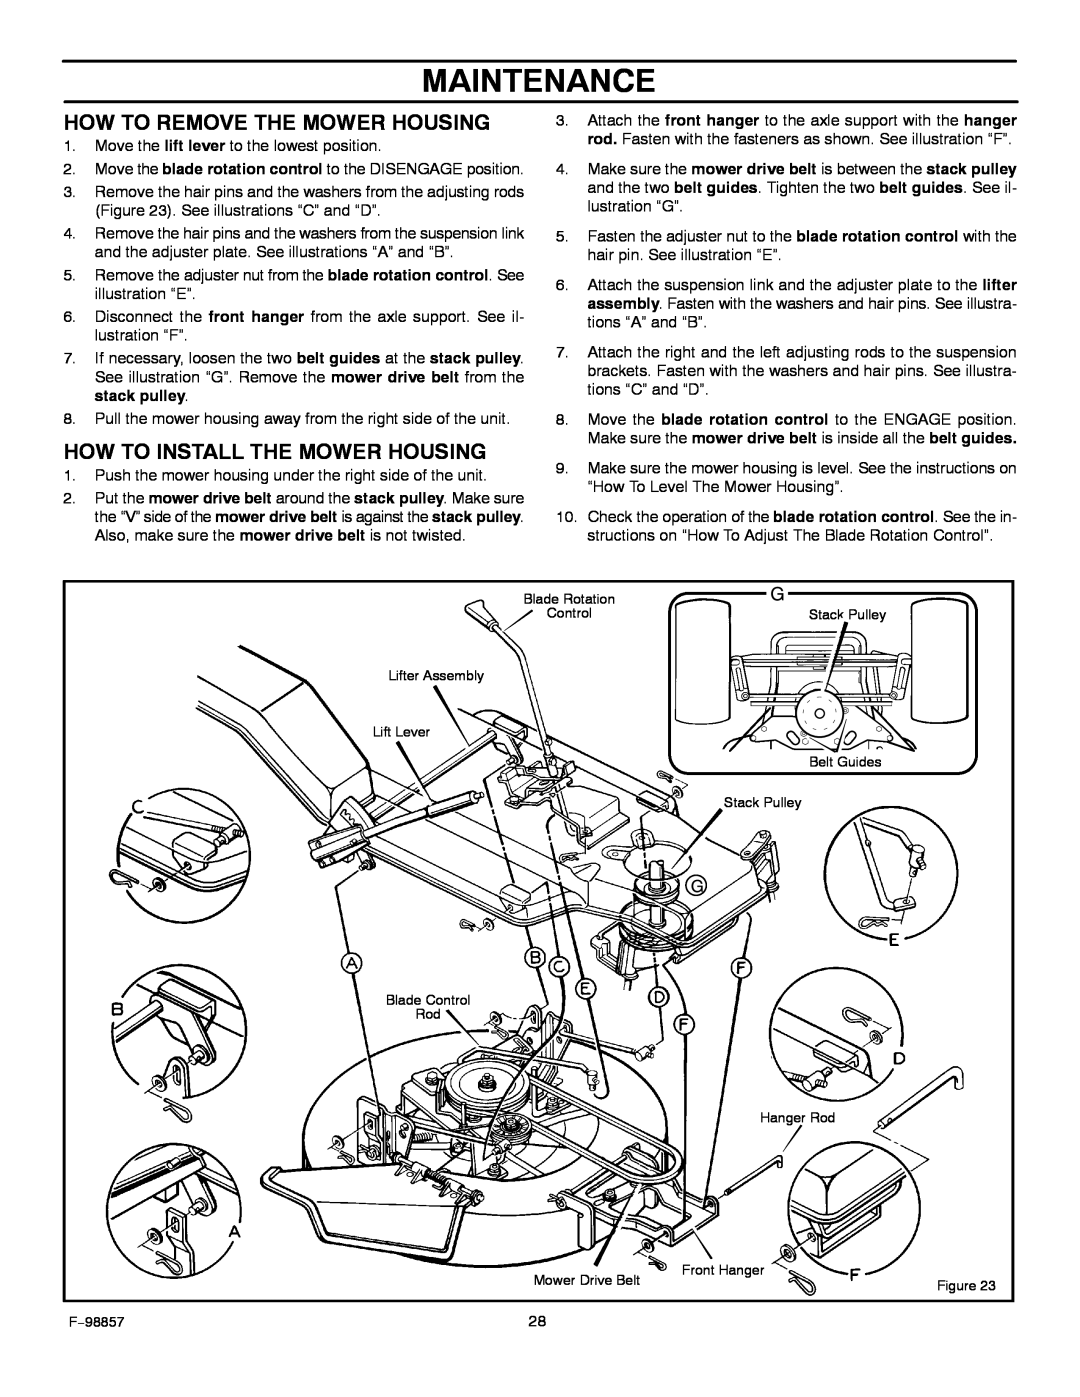 Hayter Mowers 30-Dec manual How To Remove The Mower Housing, How To Install The Mower Housing, Maintenance 